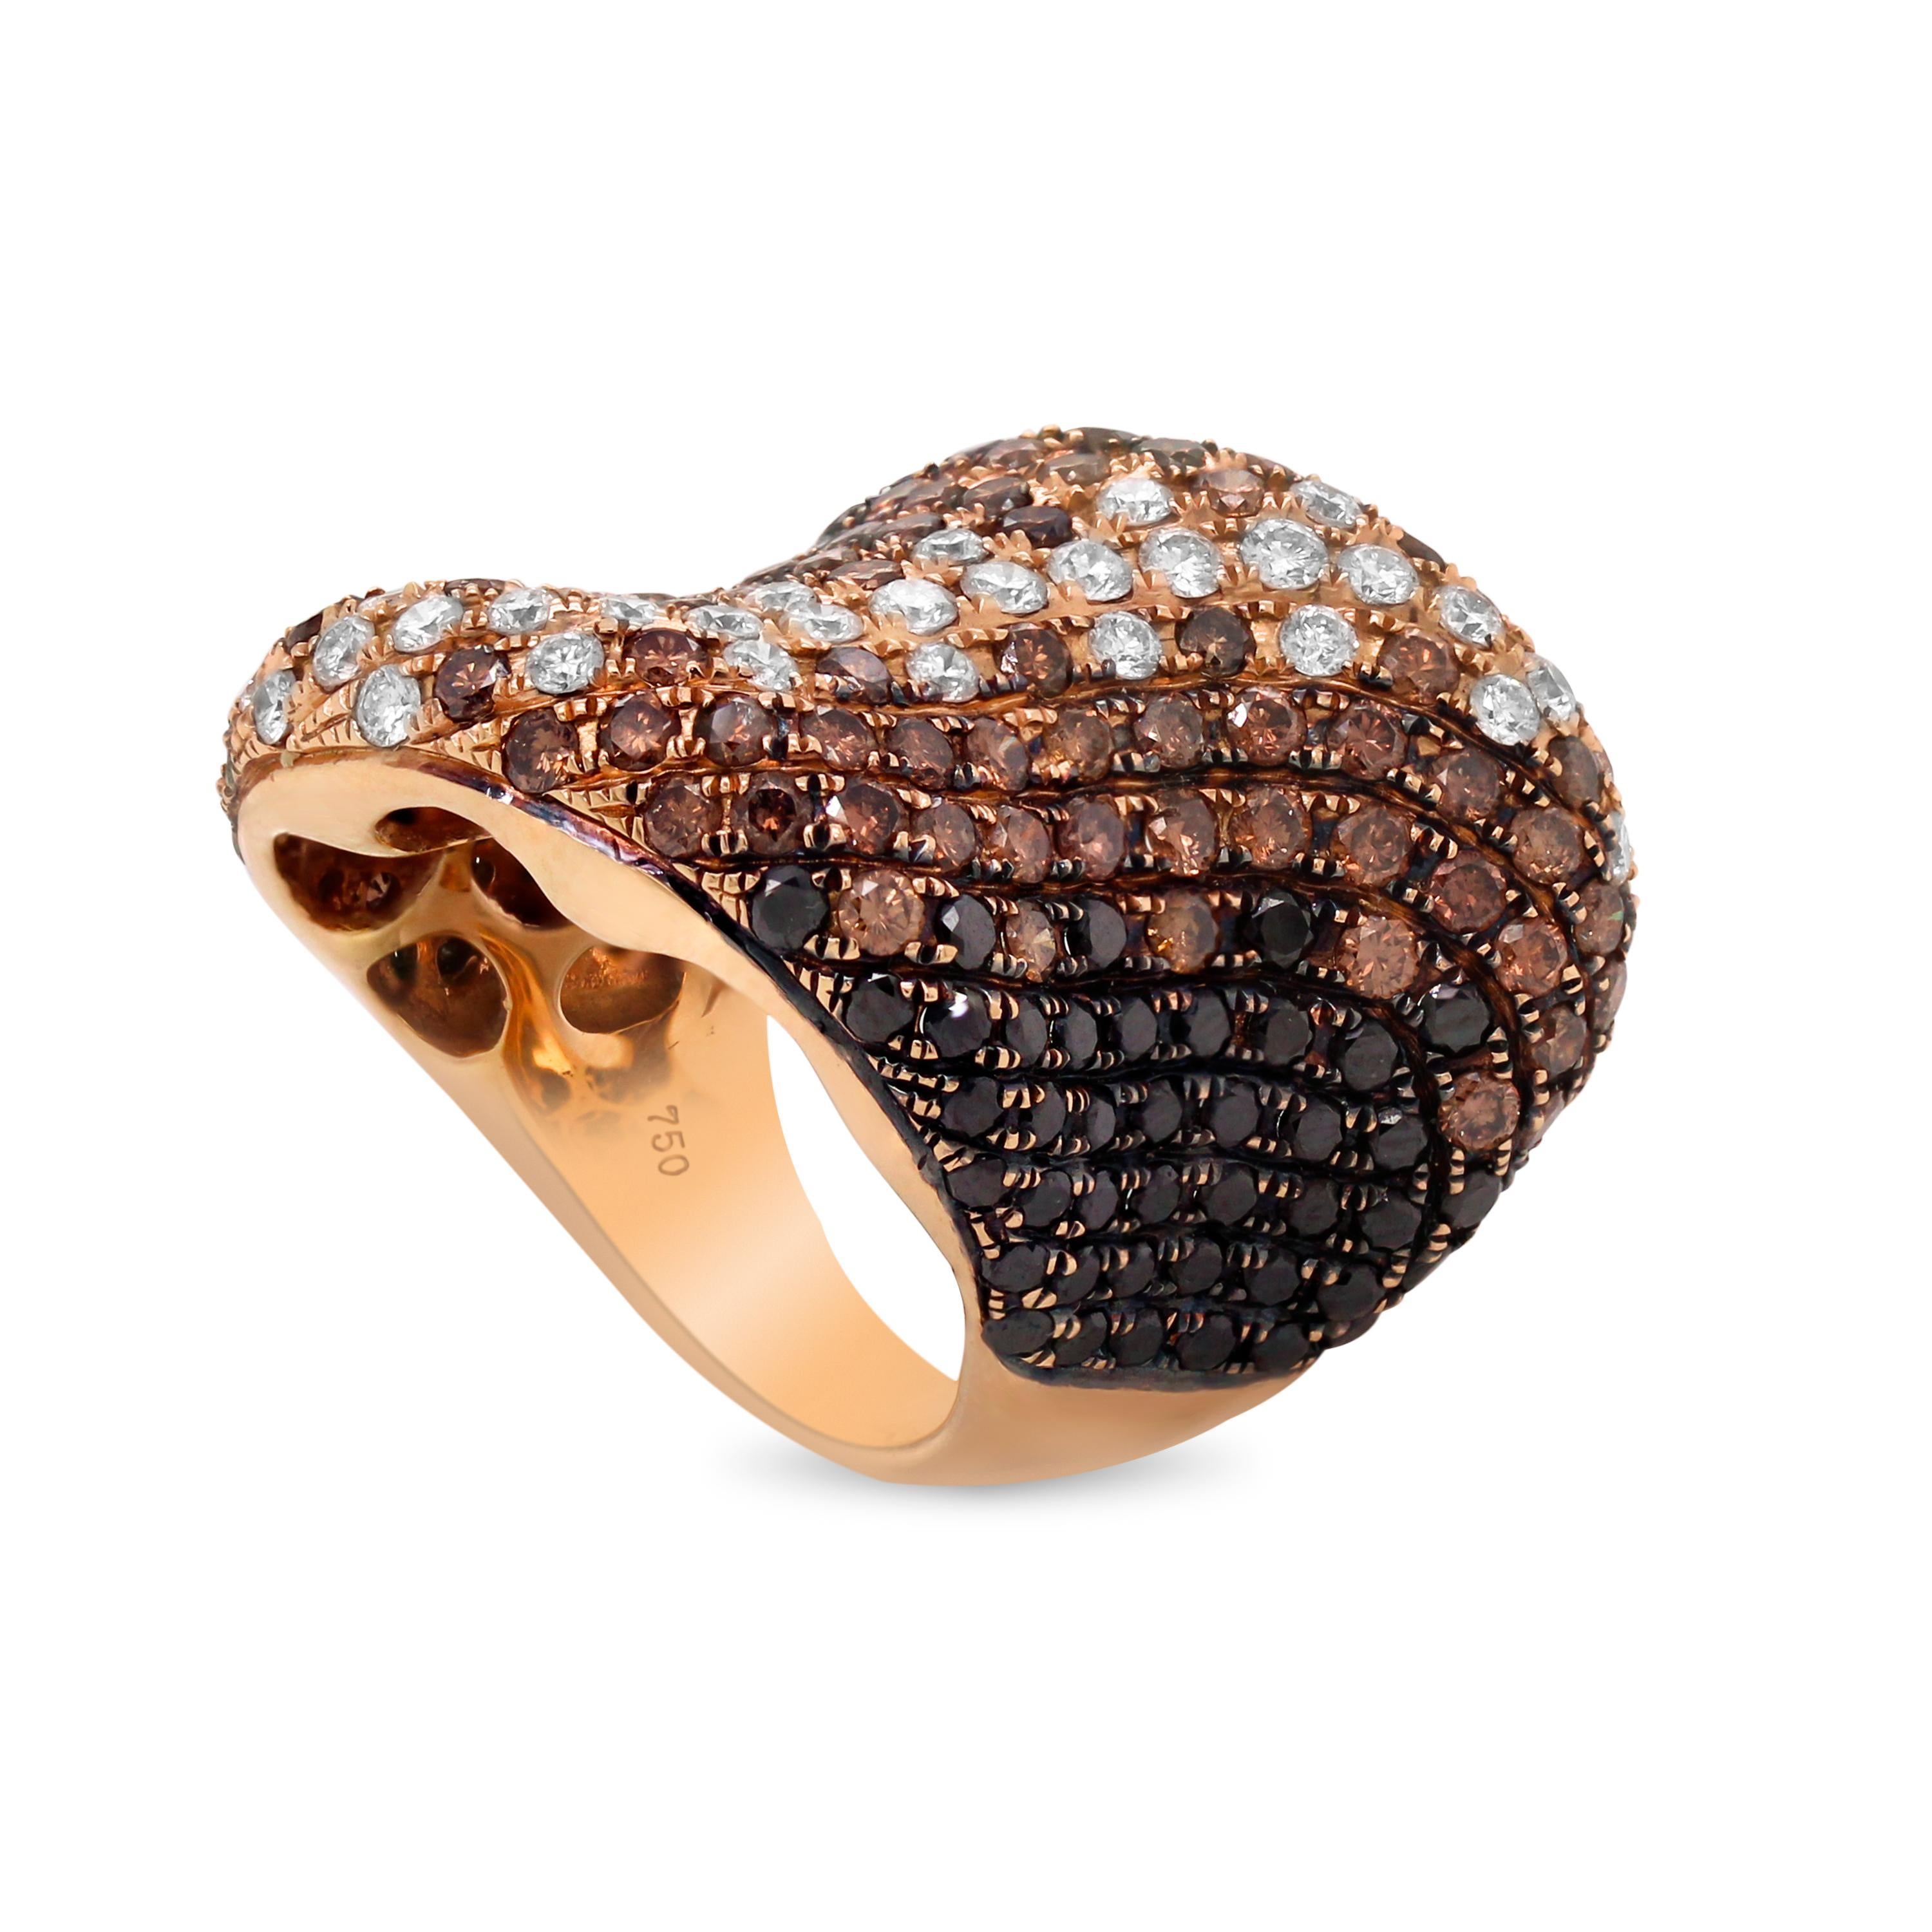 18K Rose Gold Shaded White Brown Black Diamond Curved Cocktail Ring

Apprx. 6.80 carat diamonds total weight. The ring begins with black diamonds that shade closer to brown with white diamonds in the center. The white diamonds are G color, VS